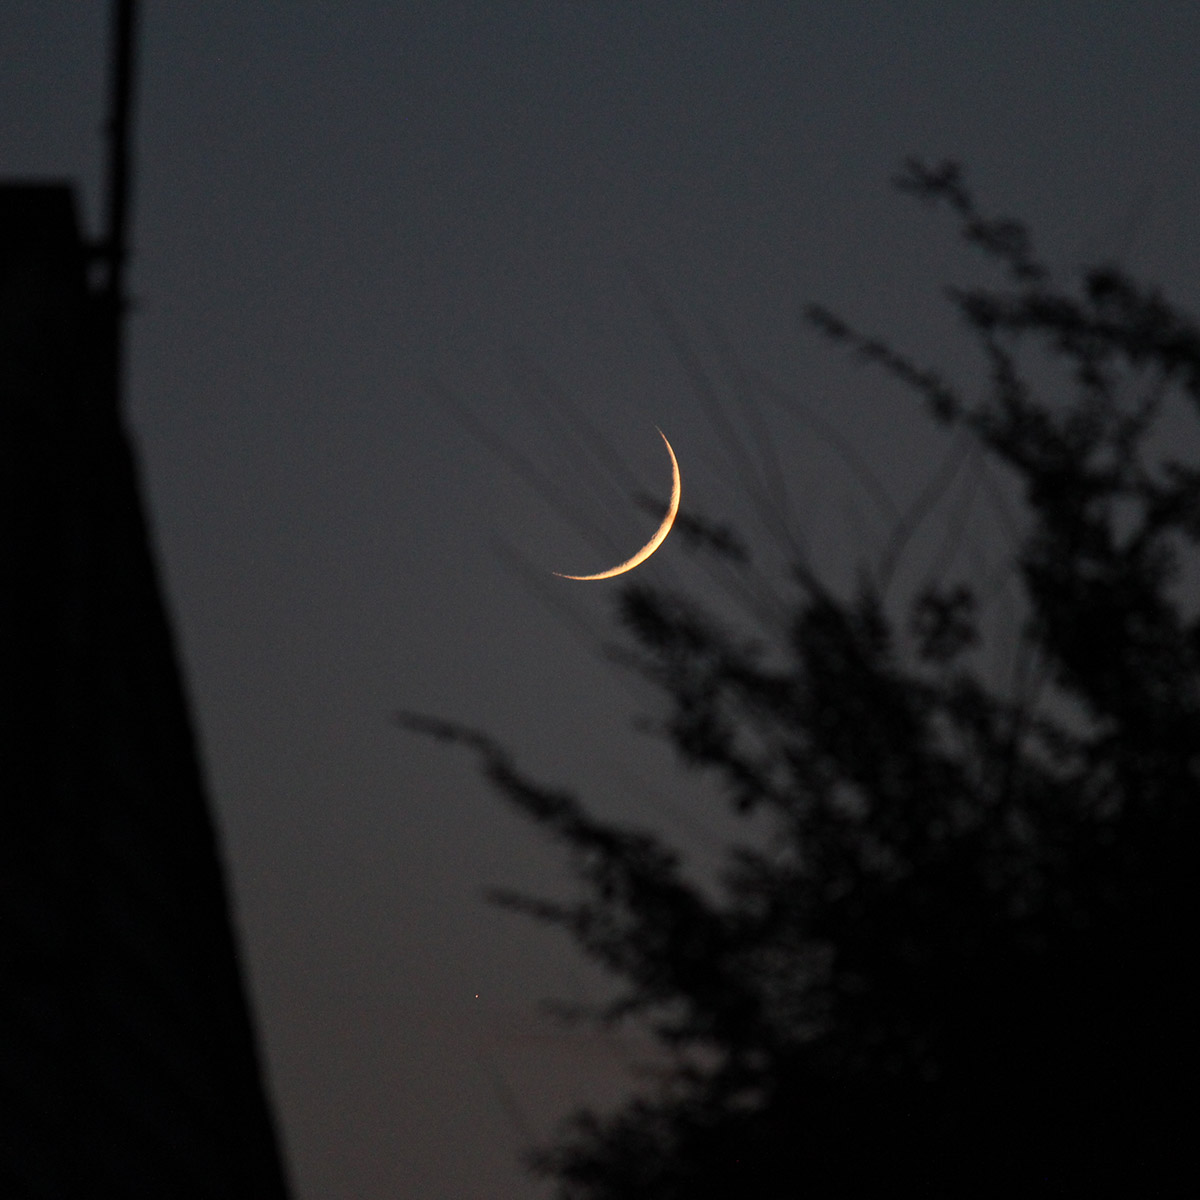 A thin yellow crescent of a Moon is visible hanging branches.